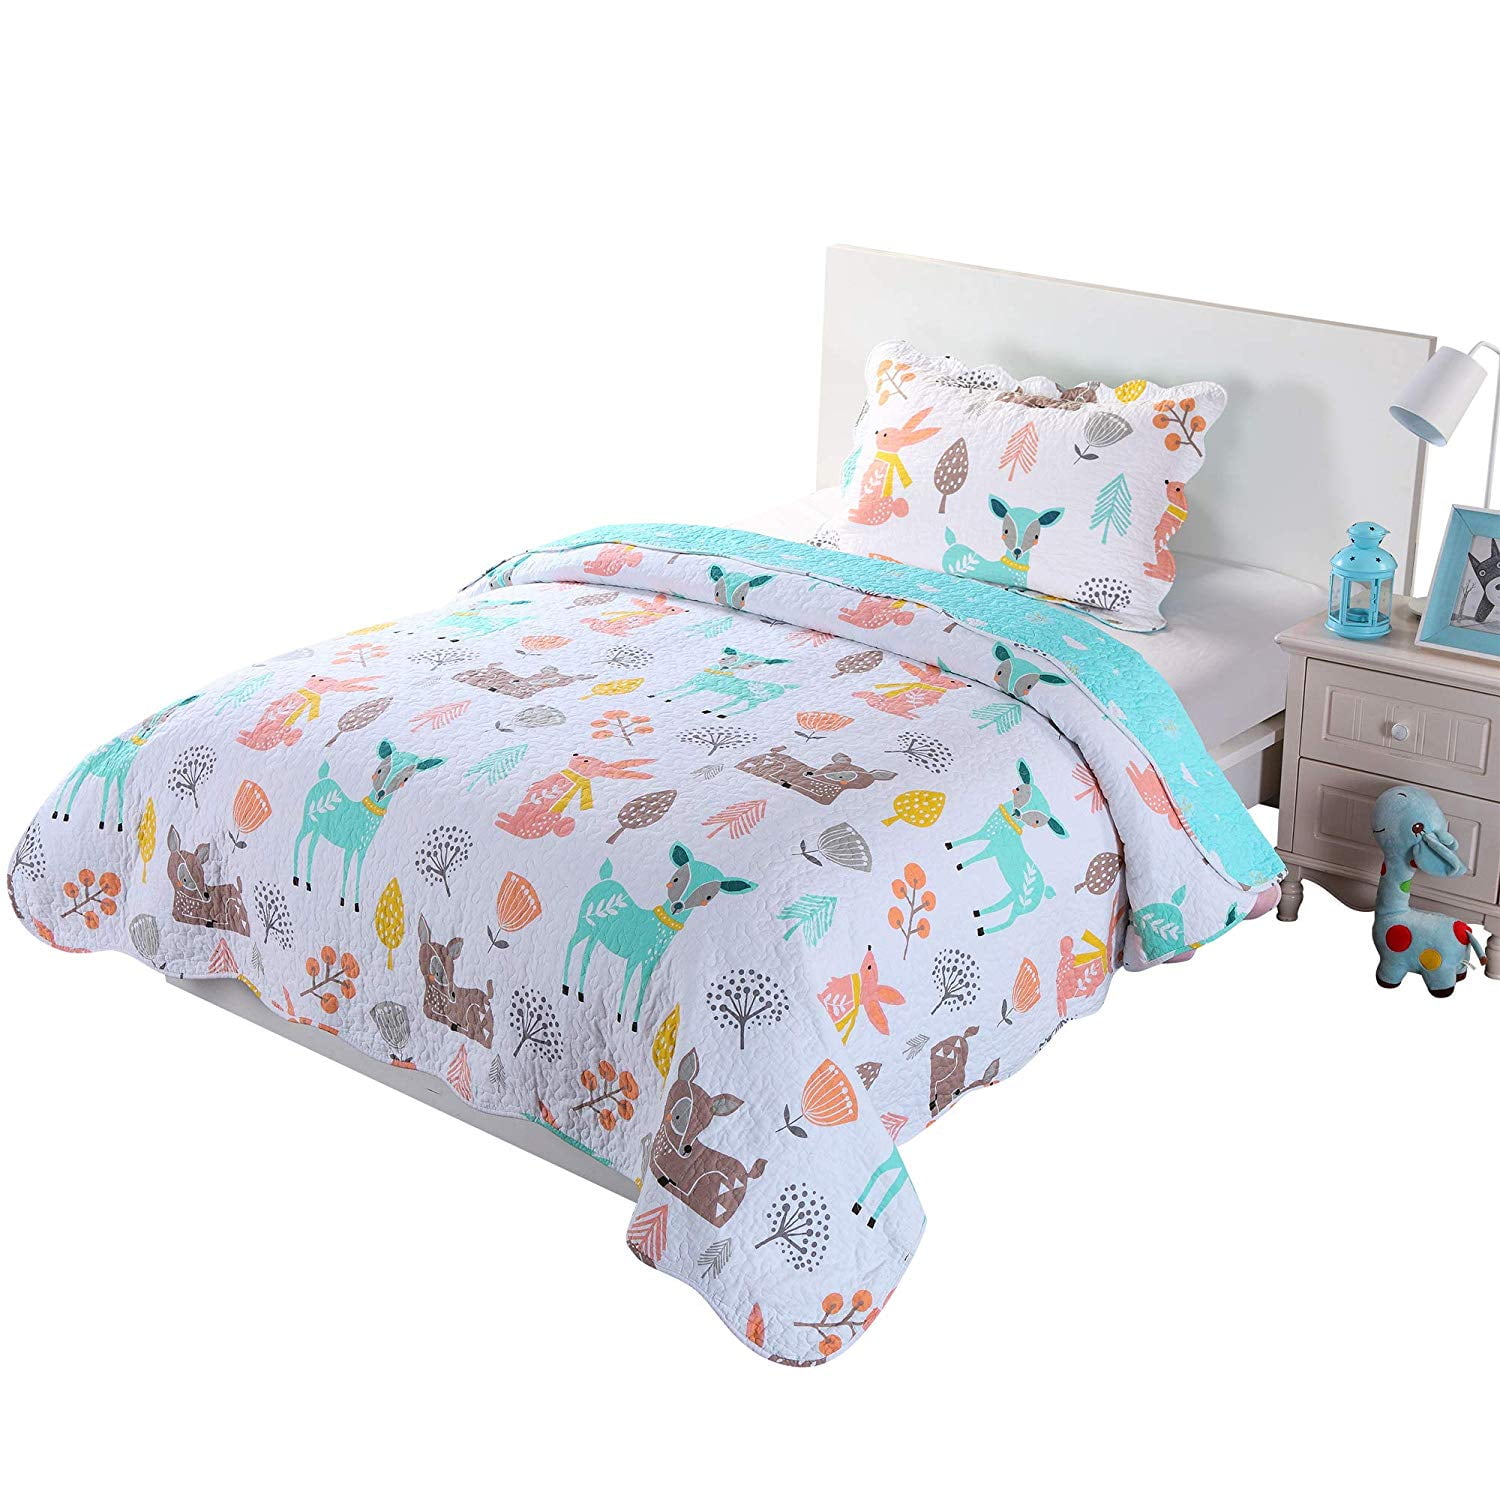 Kids Bedspread Quilts Set Throw Blanket for Teens Boys Girls Bedding Twin A72 